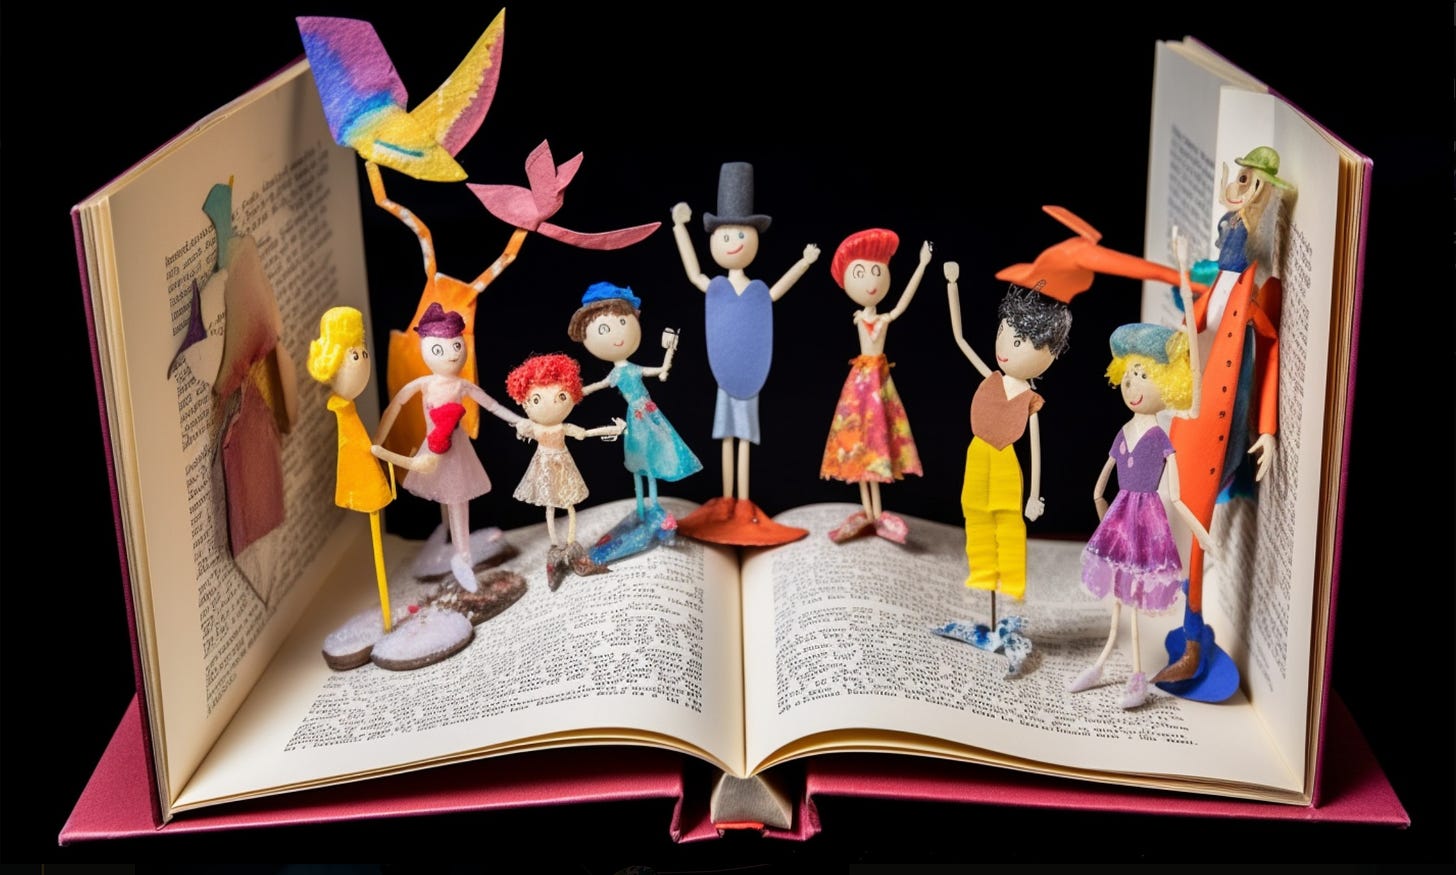 Paper puppet theatre, characters stepping out of the pages of a thick book with many pages